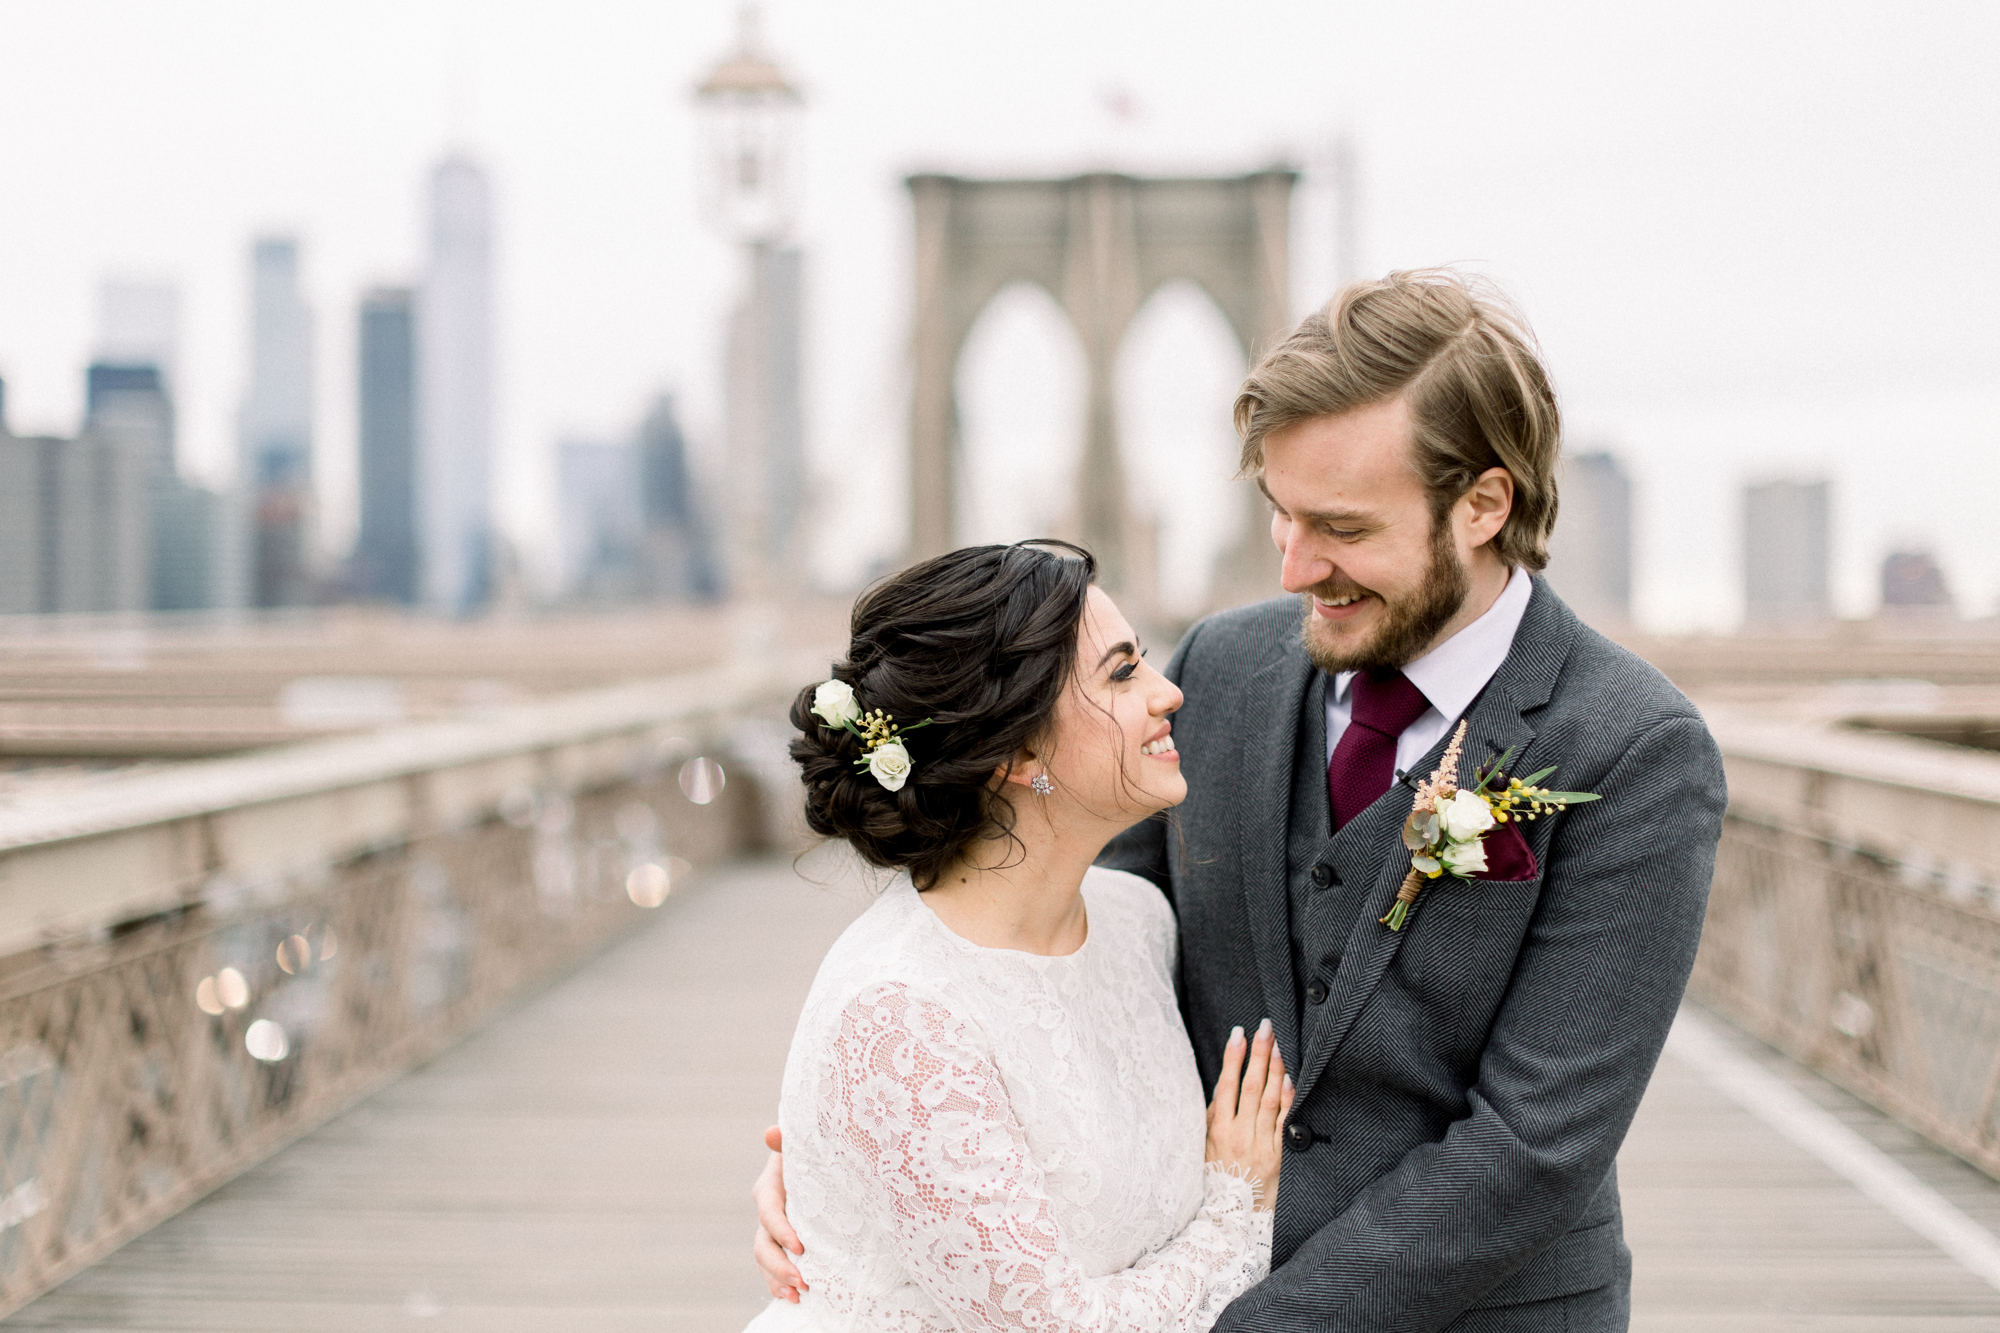 Lovely NYC wedding photographer and videographer